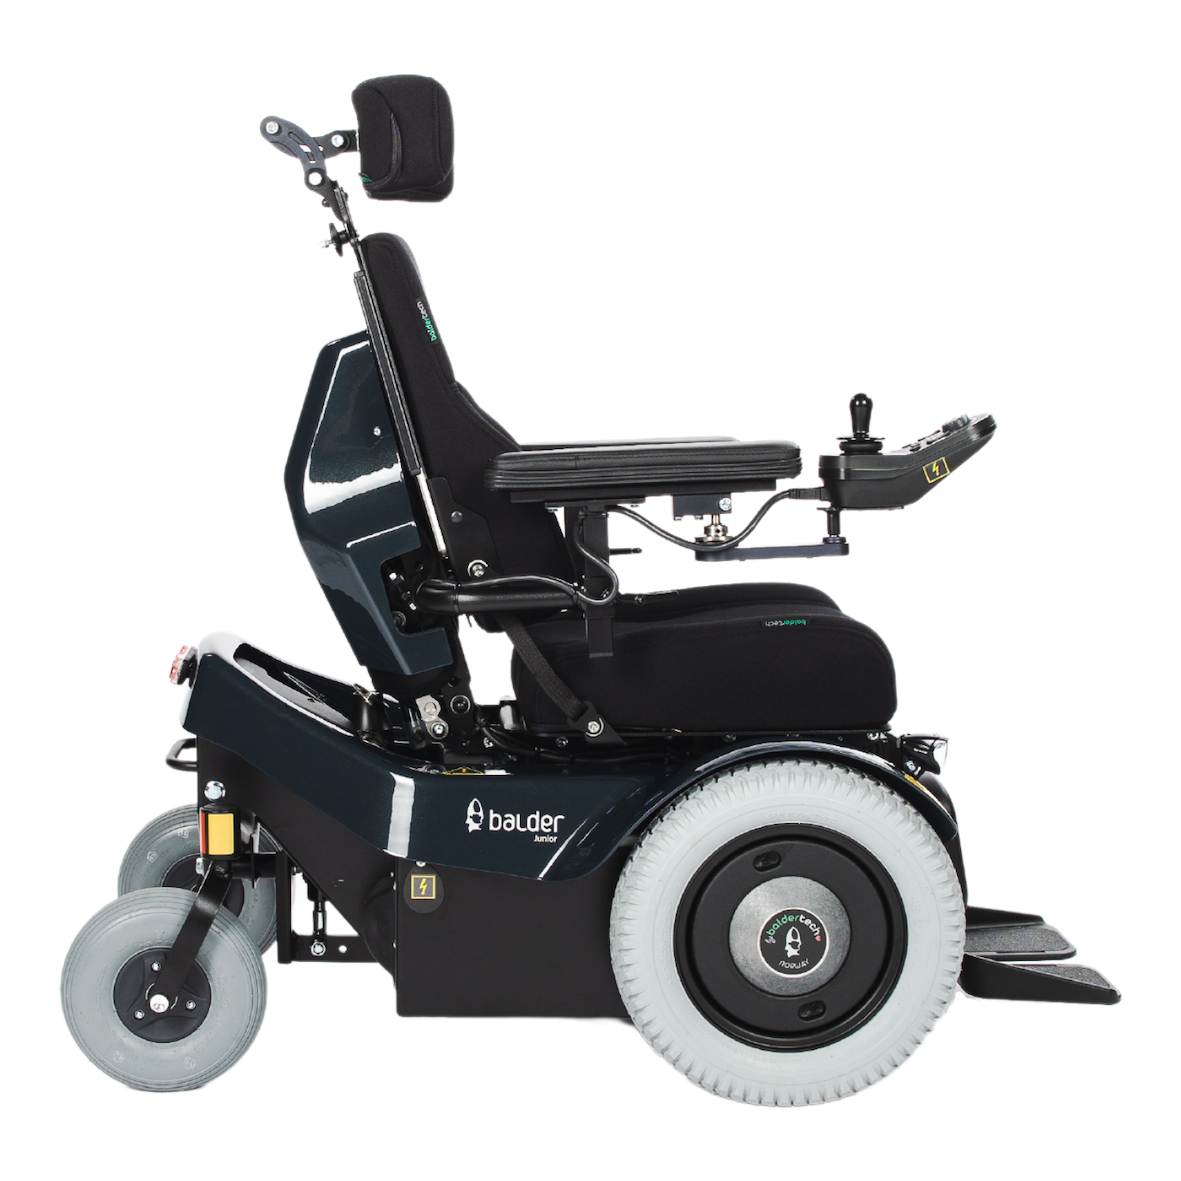 The side view of a Balder Junior J335 childrens powerchair in a seated position.